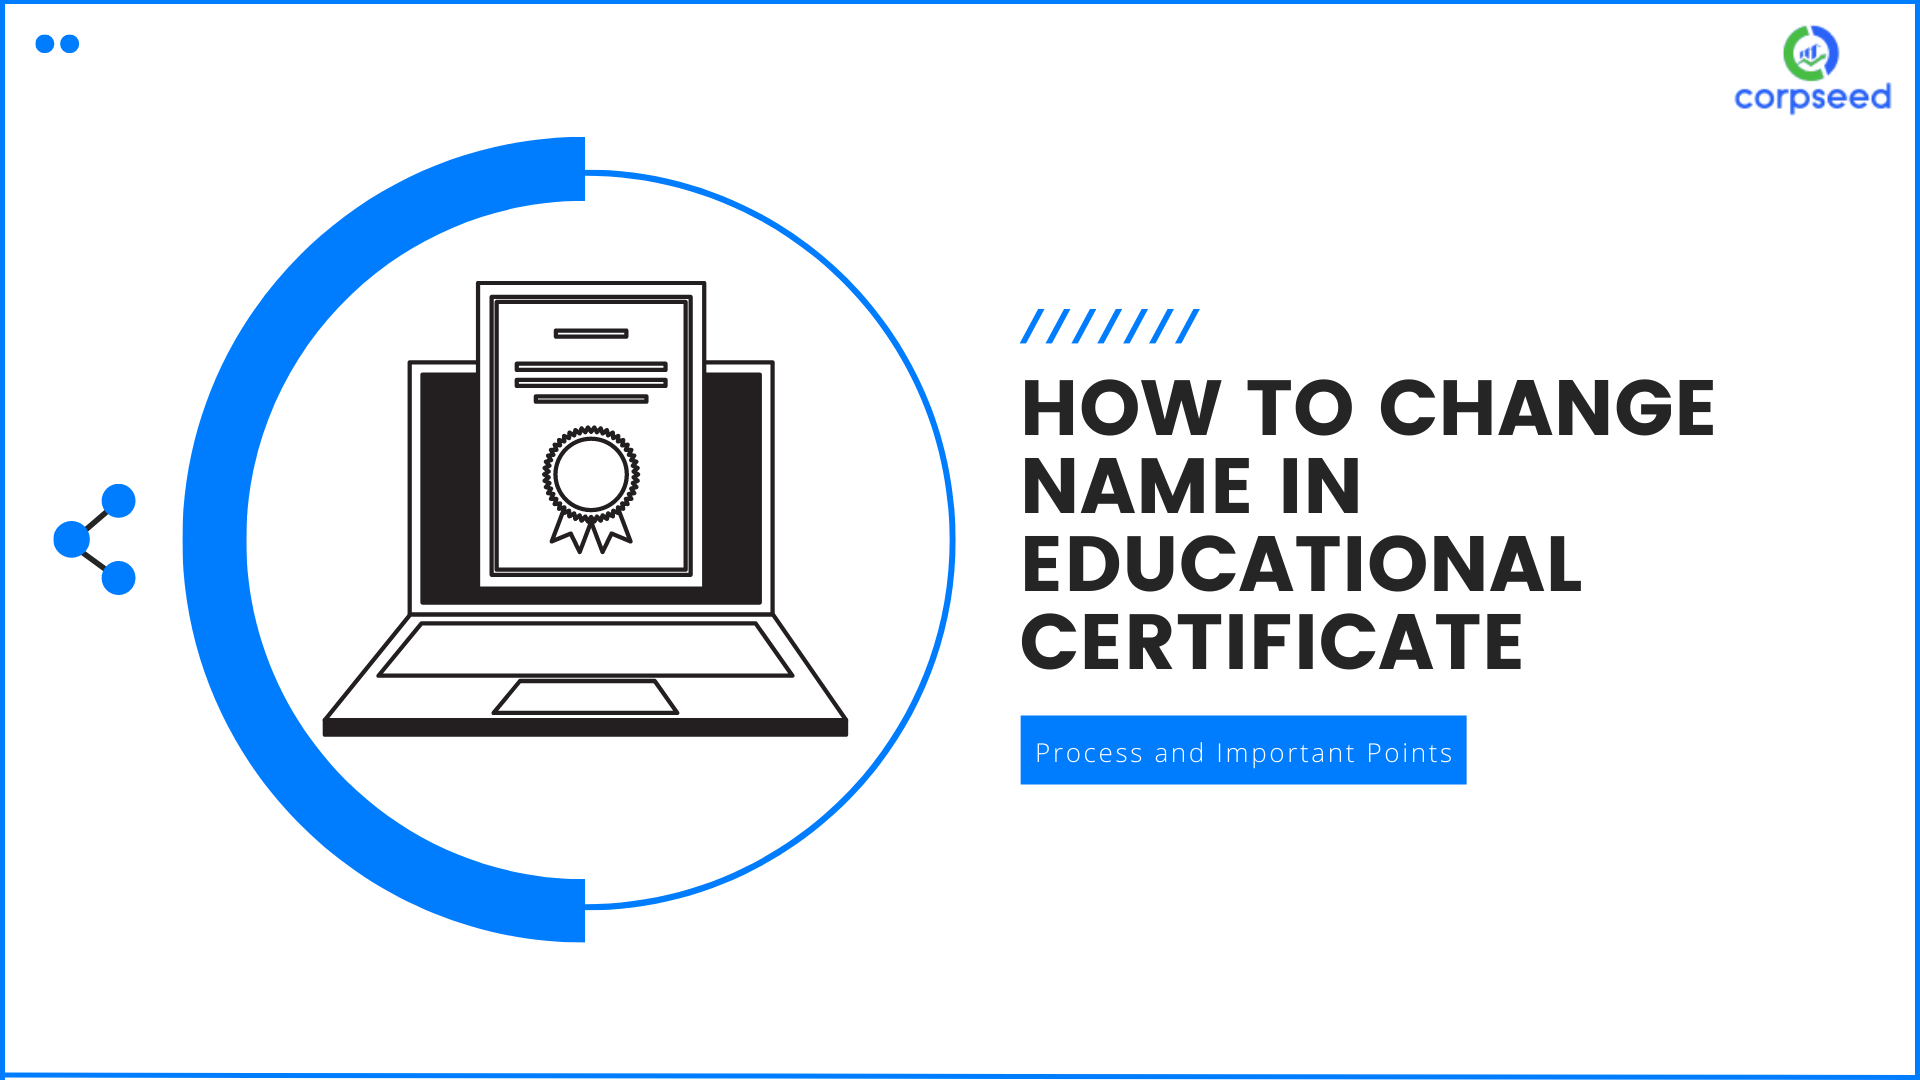 how-to-change-name-in-educational-certificate-corpseed.png